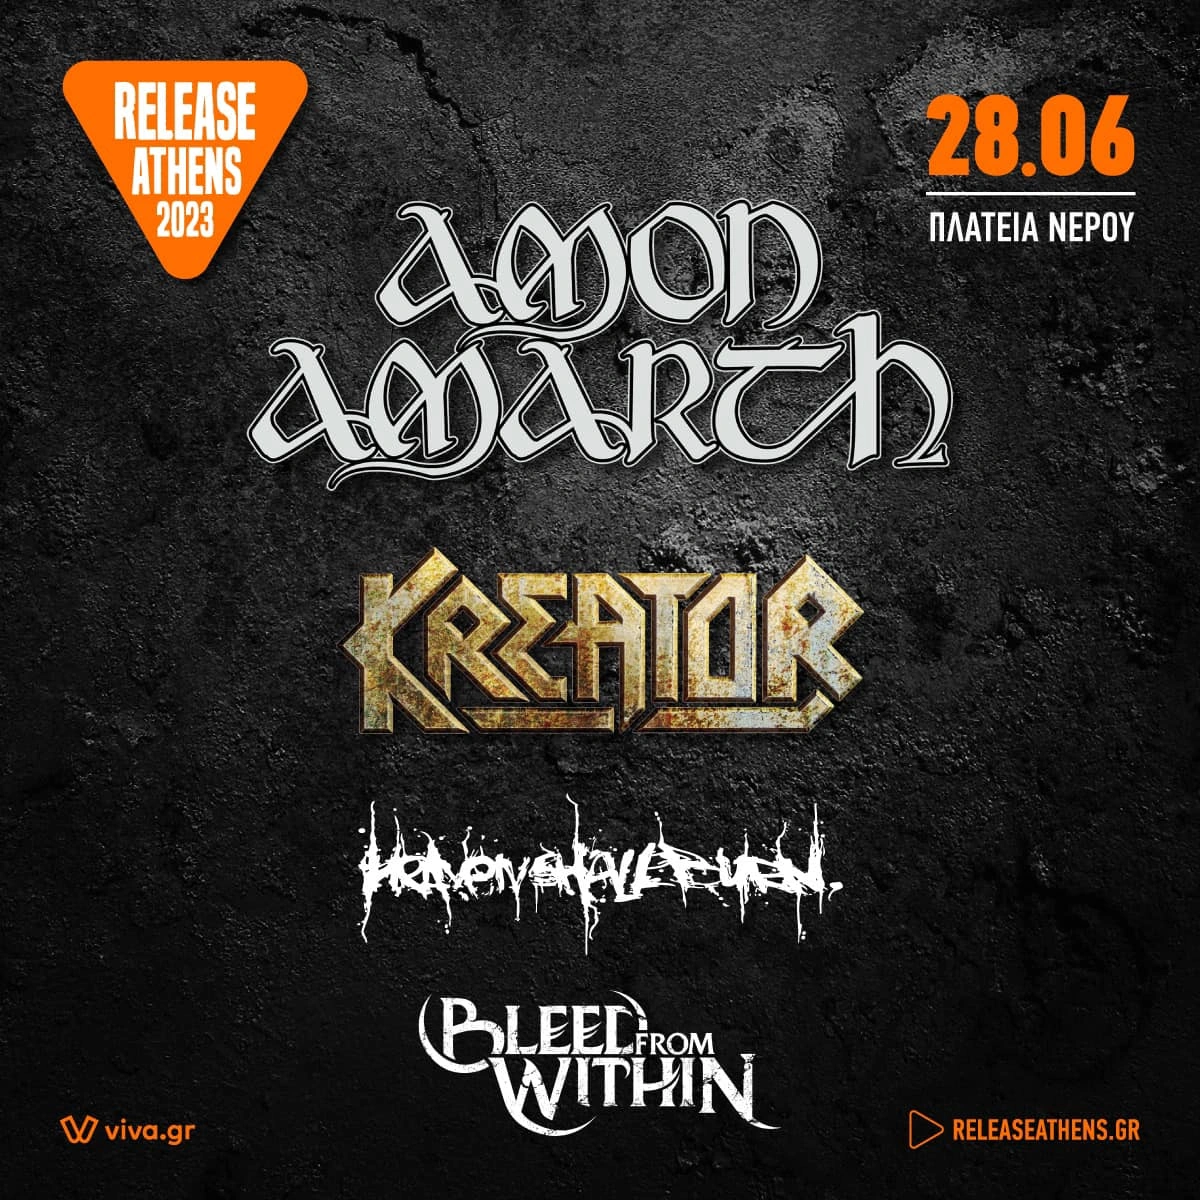 Amon Amarth, Kreator, Heaven Shall Burn, και Bleed From Within στην πιο metal βραδιά του Release Athens 2023!